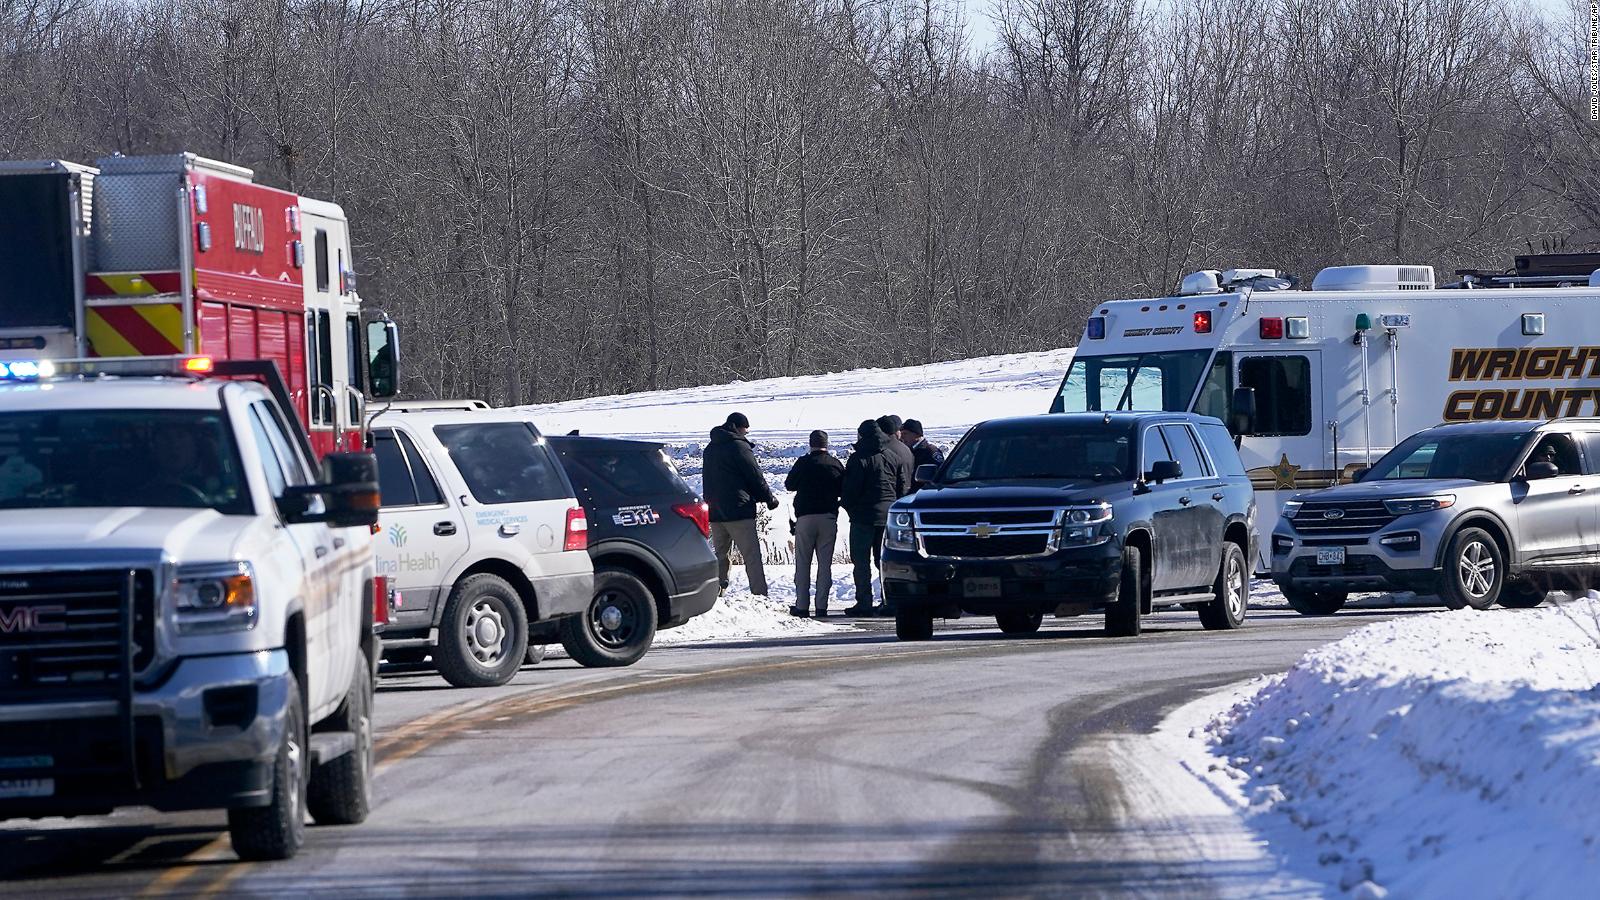 Suspect In Minnesota Clinic Shooting Had Made Prior Threat Police Report Says Cnn